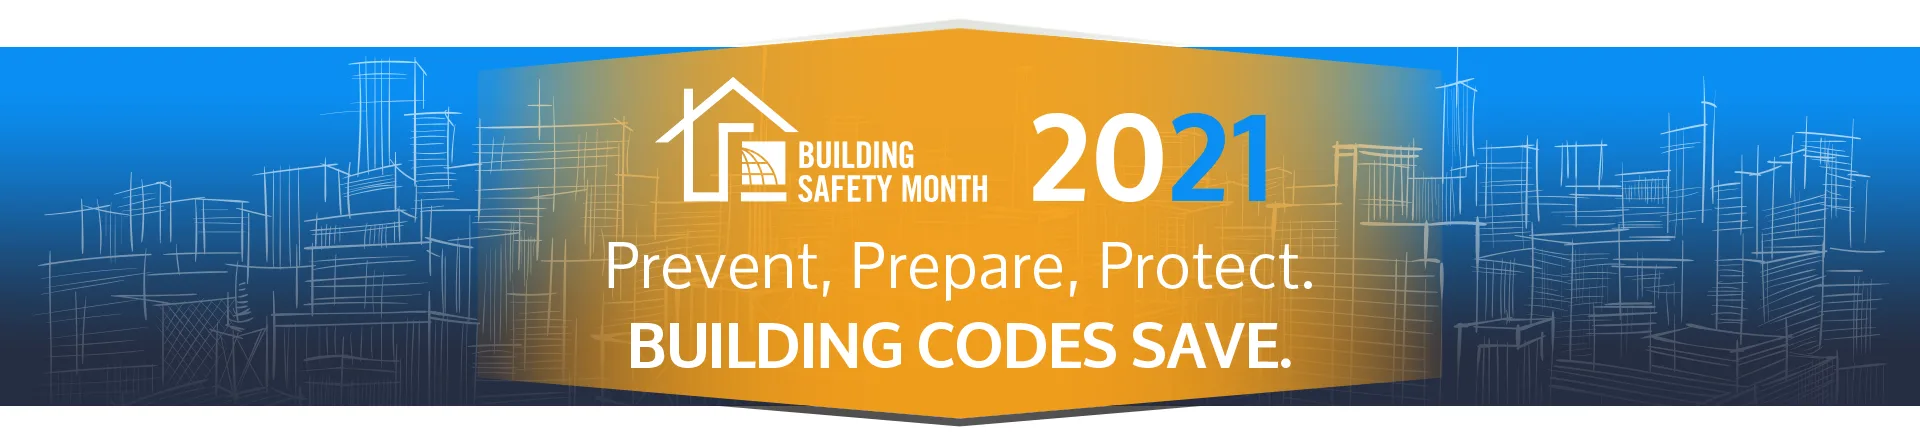 2021 Building Safety Month